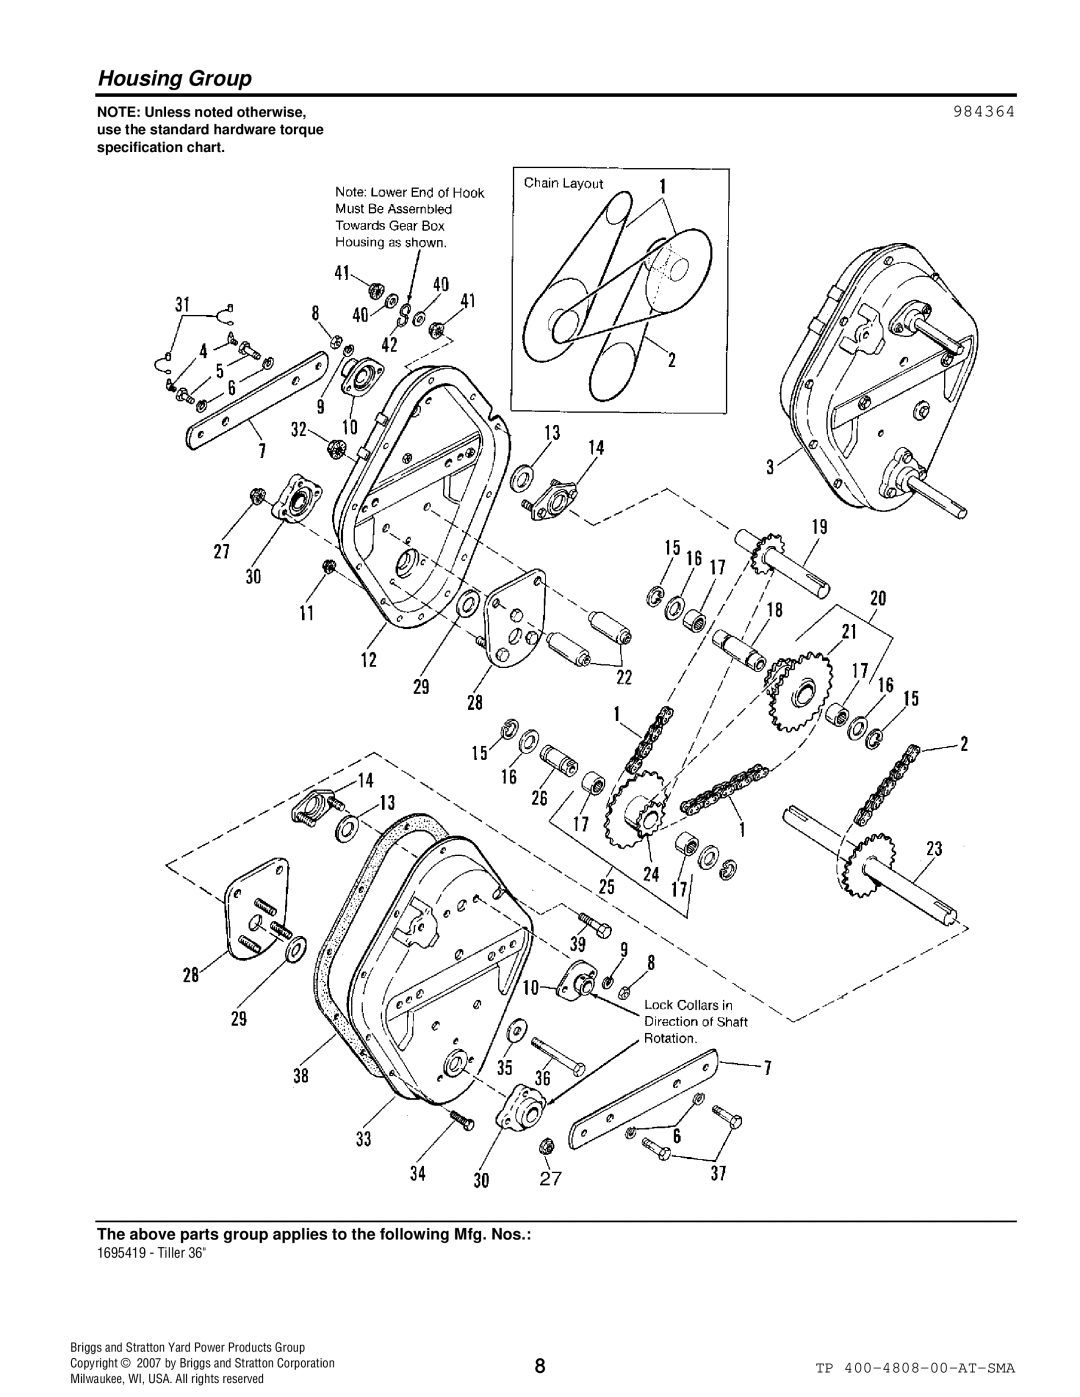 Snapper 4808 manual Housing Group, 984364, NOTE: Unless noted otherwise, Briggs and Stratton Yard Power Products Group 